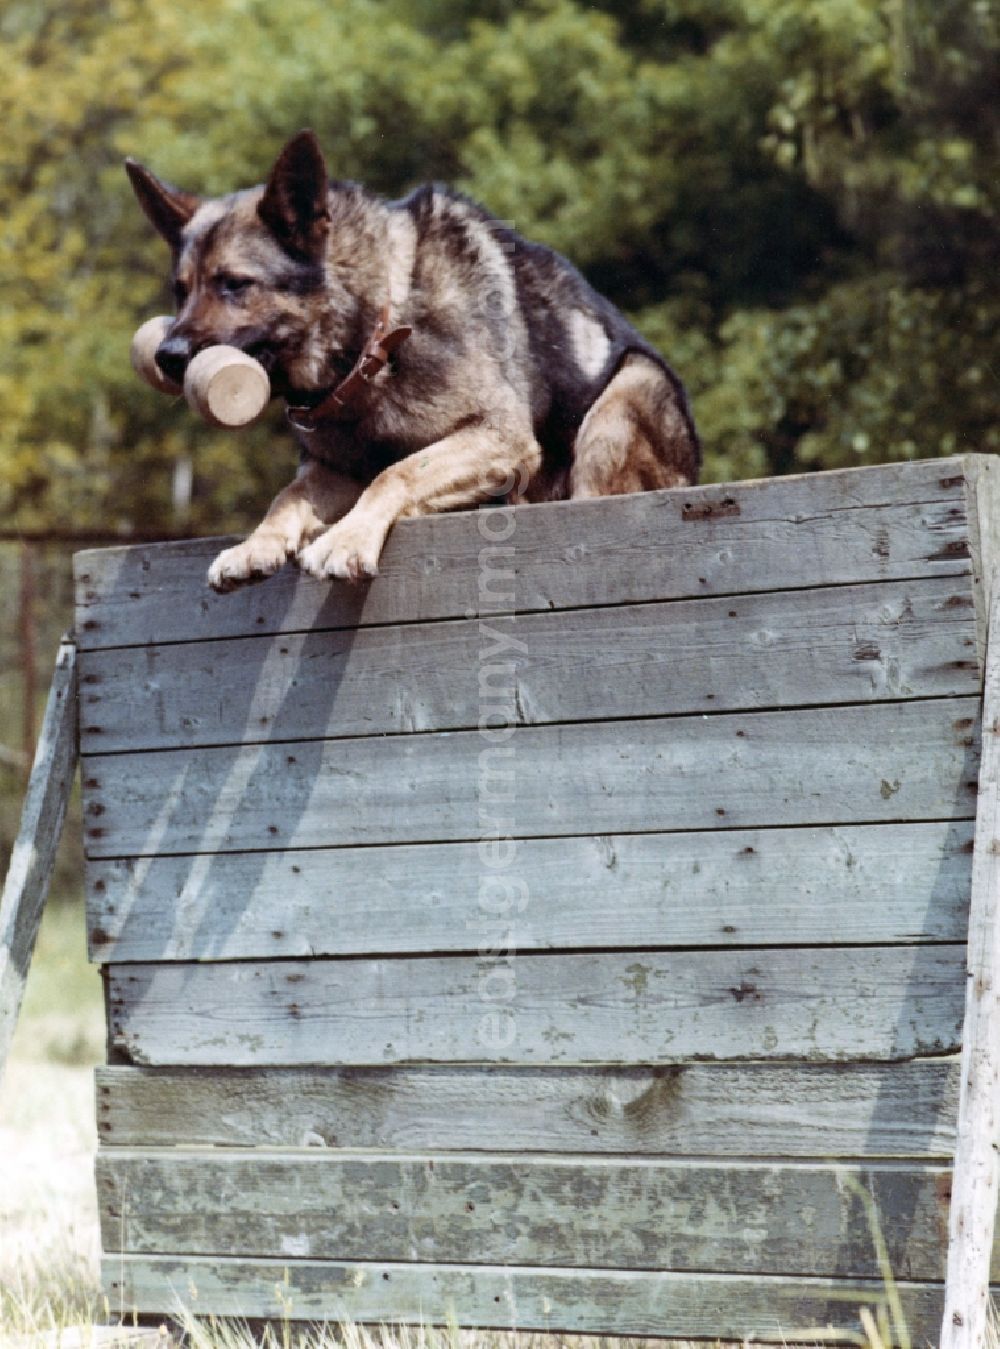 GDR image archive: Abbenrode - Guard dog training by soldiers of the border guards of the GDR